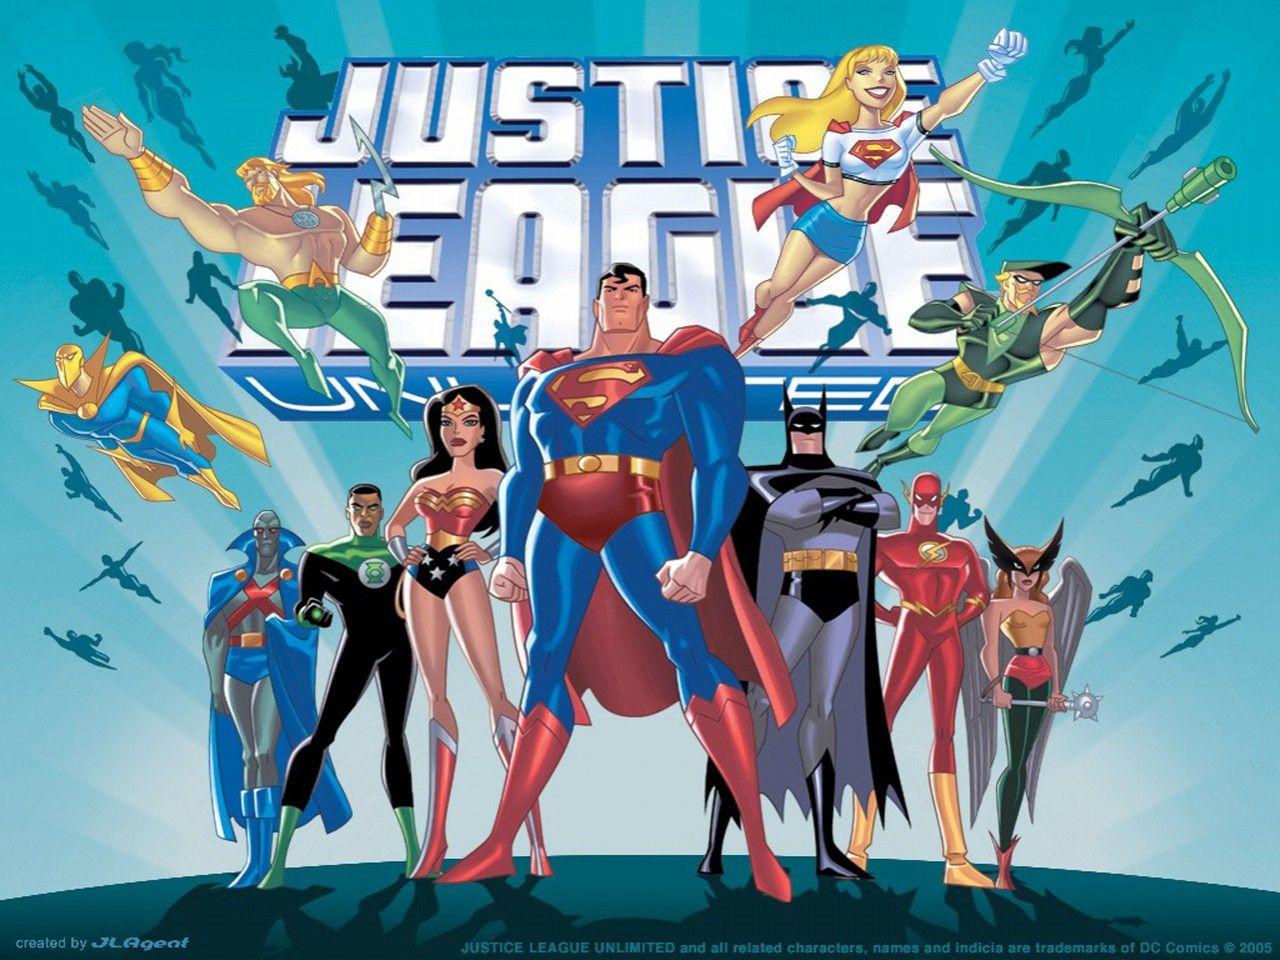 justice league unlimited Computer Wallpaper, Desktop Backgroundx960. Justice league unlimited, Superhero tv shows, Funny picture